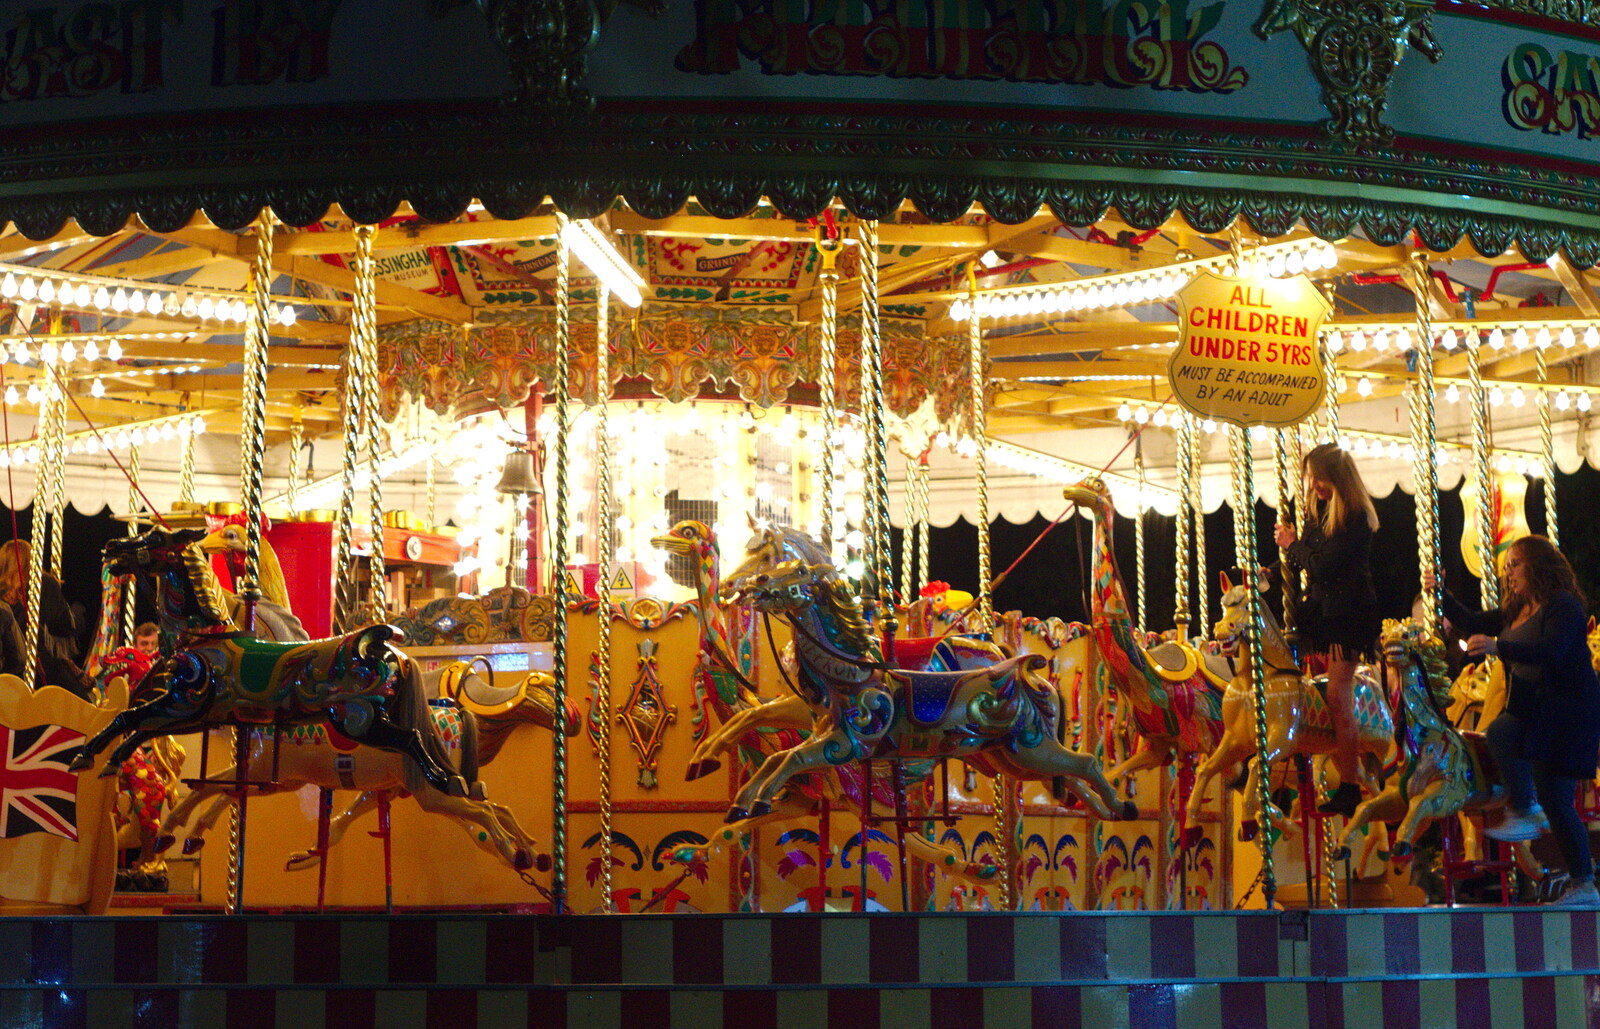 There are free rides on the gallopers from The Bressingham Band Night, Bressingham Steam Museum, Norfolk - 5th October 2019